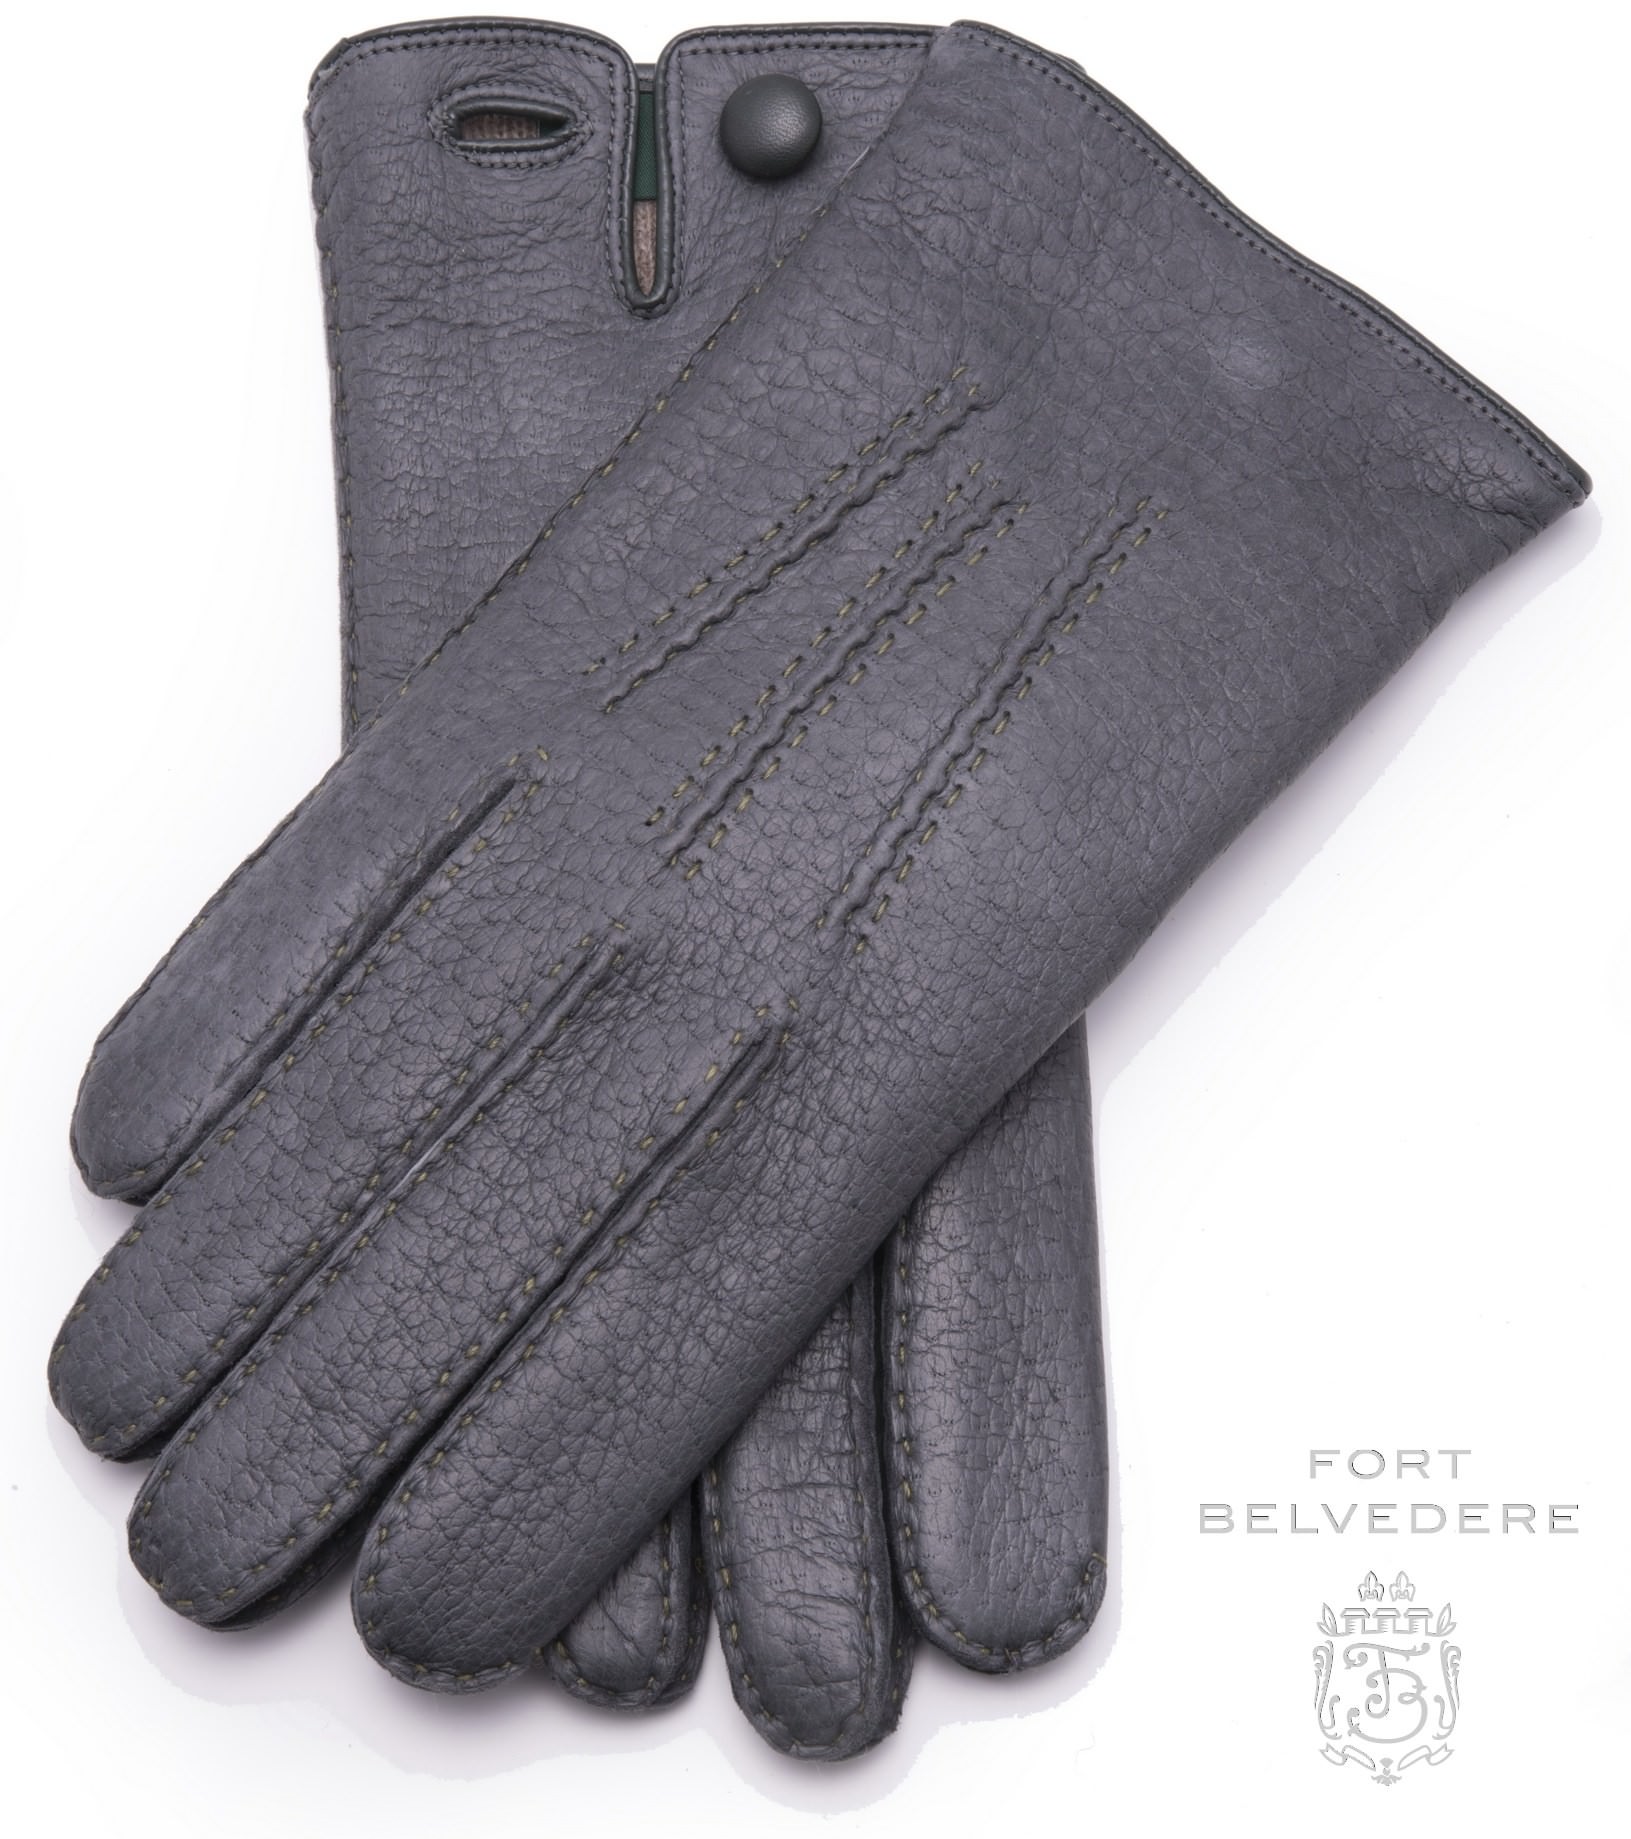 HydroPeccary Gloves from Fort Belvedere